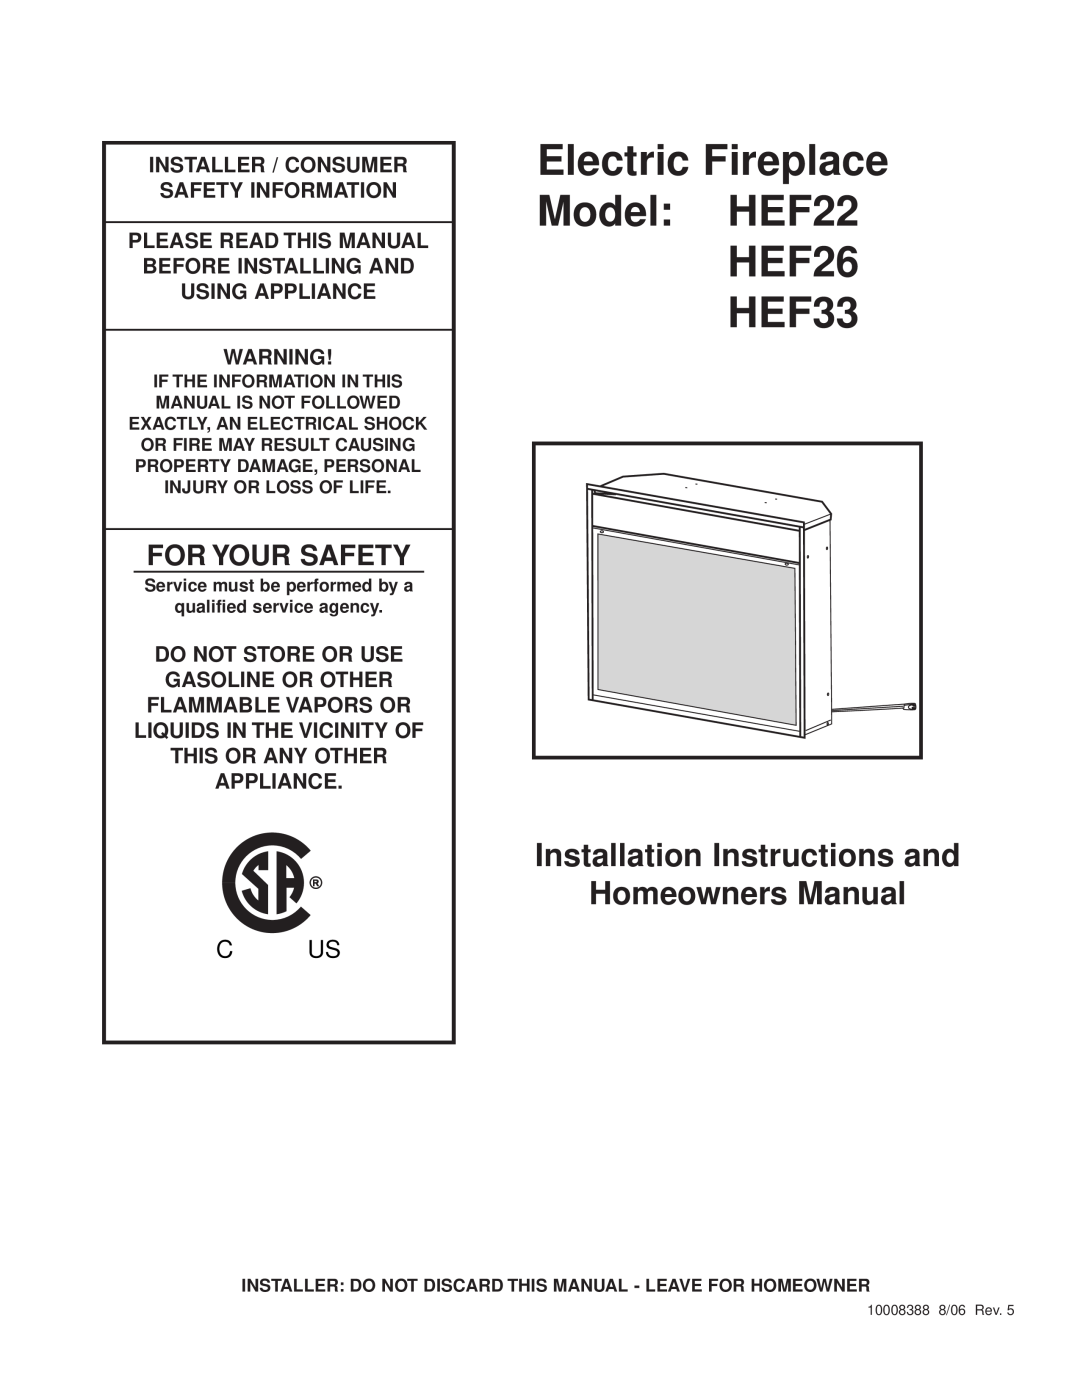 CFM Corporation installation instructions Electric Fireplace Model HEF22 HEF26 HEF33, Safety Information, Appliance 